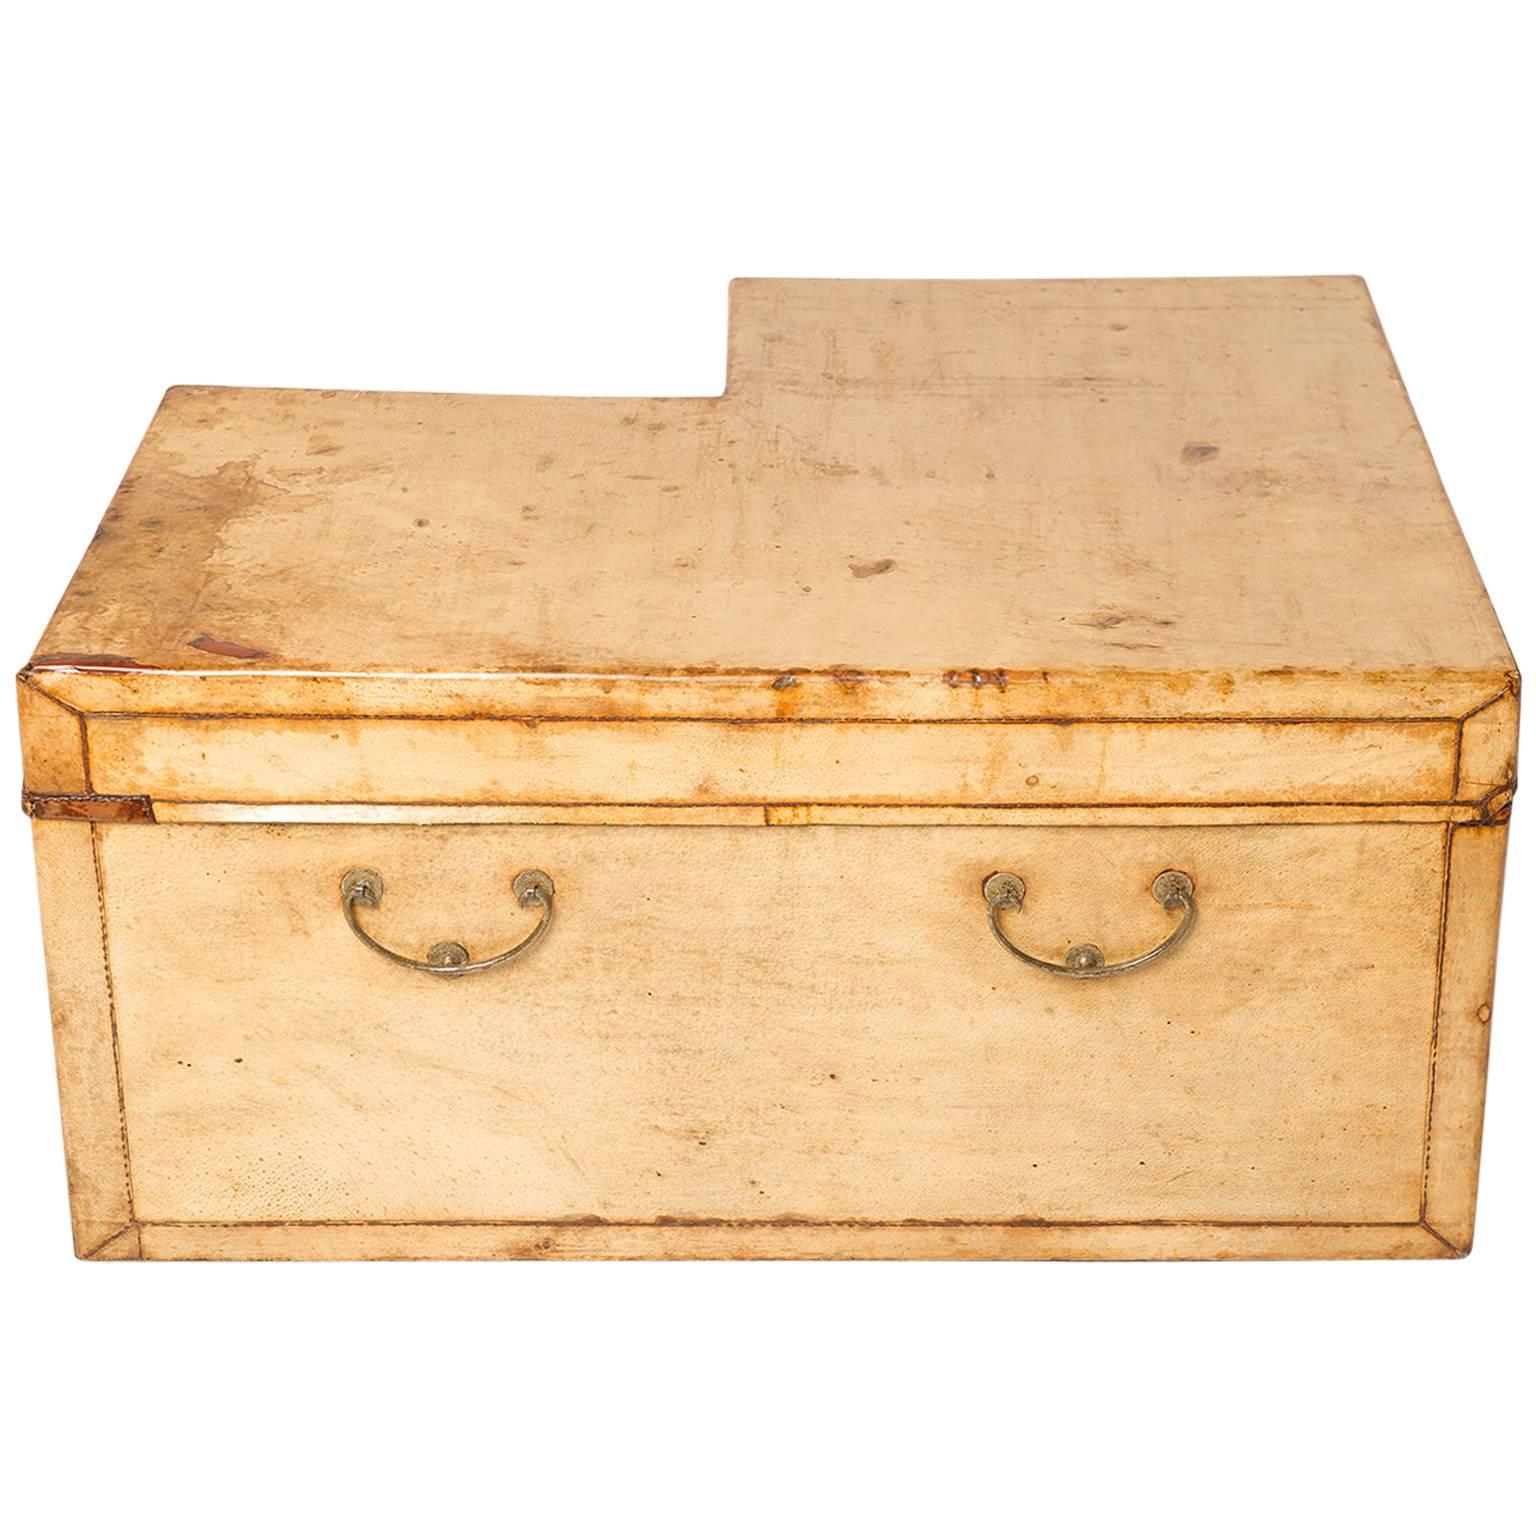  Leather Corner  Coffee Table or Trunk  For Sale